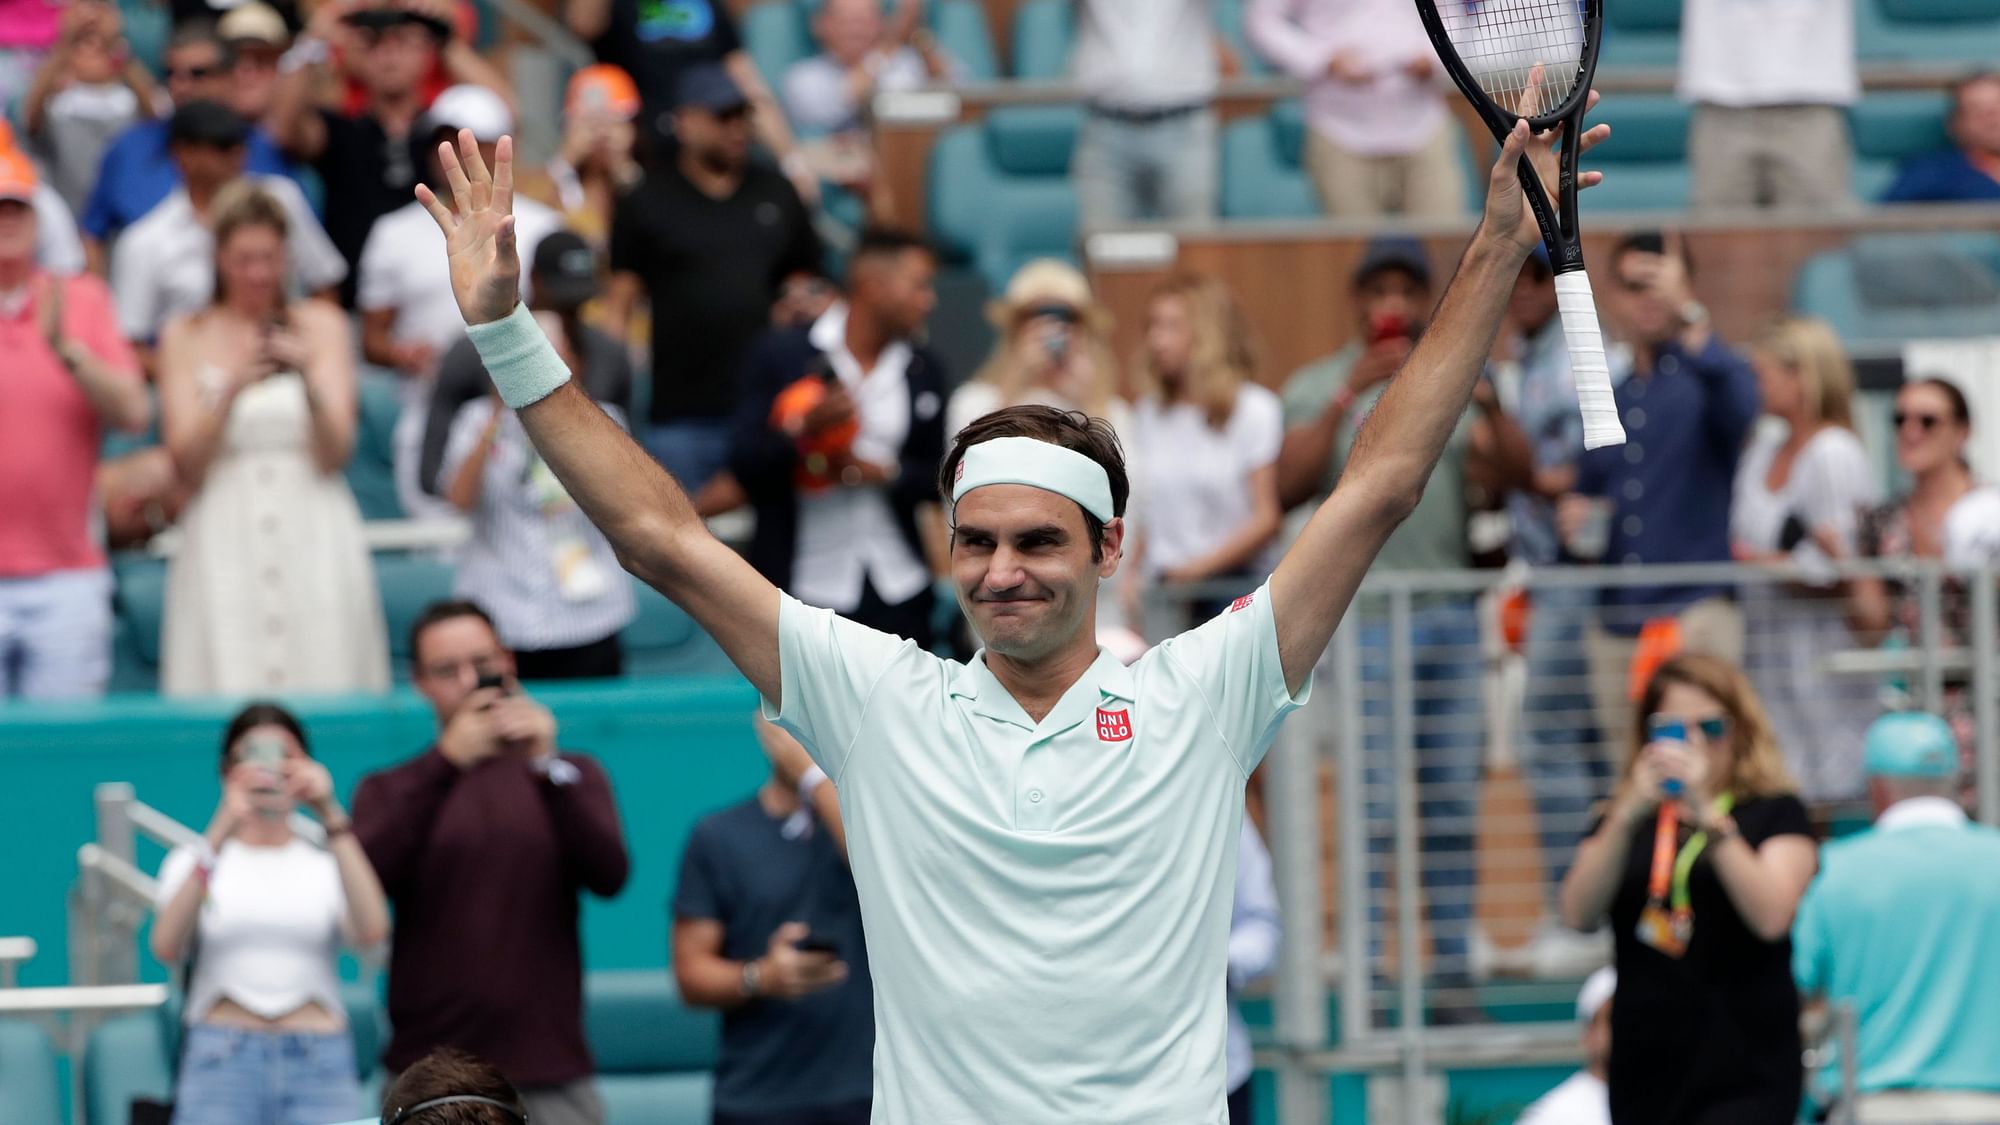 Roger Federer reacts after defeating John Isner in the singles final of the Miami Open.